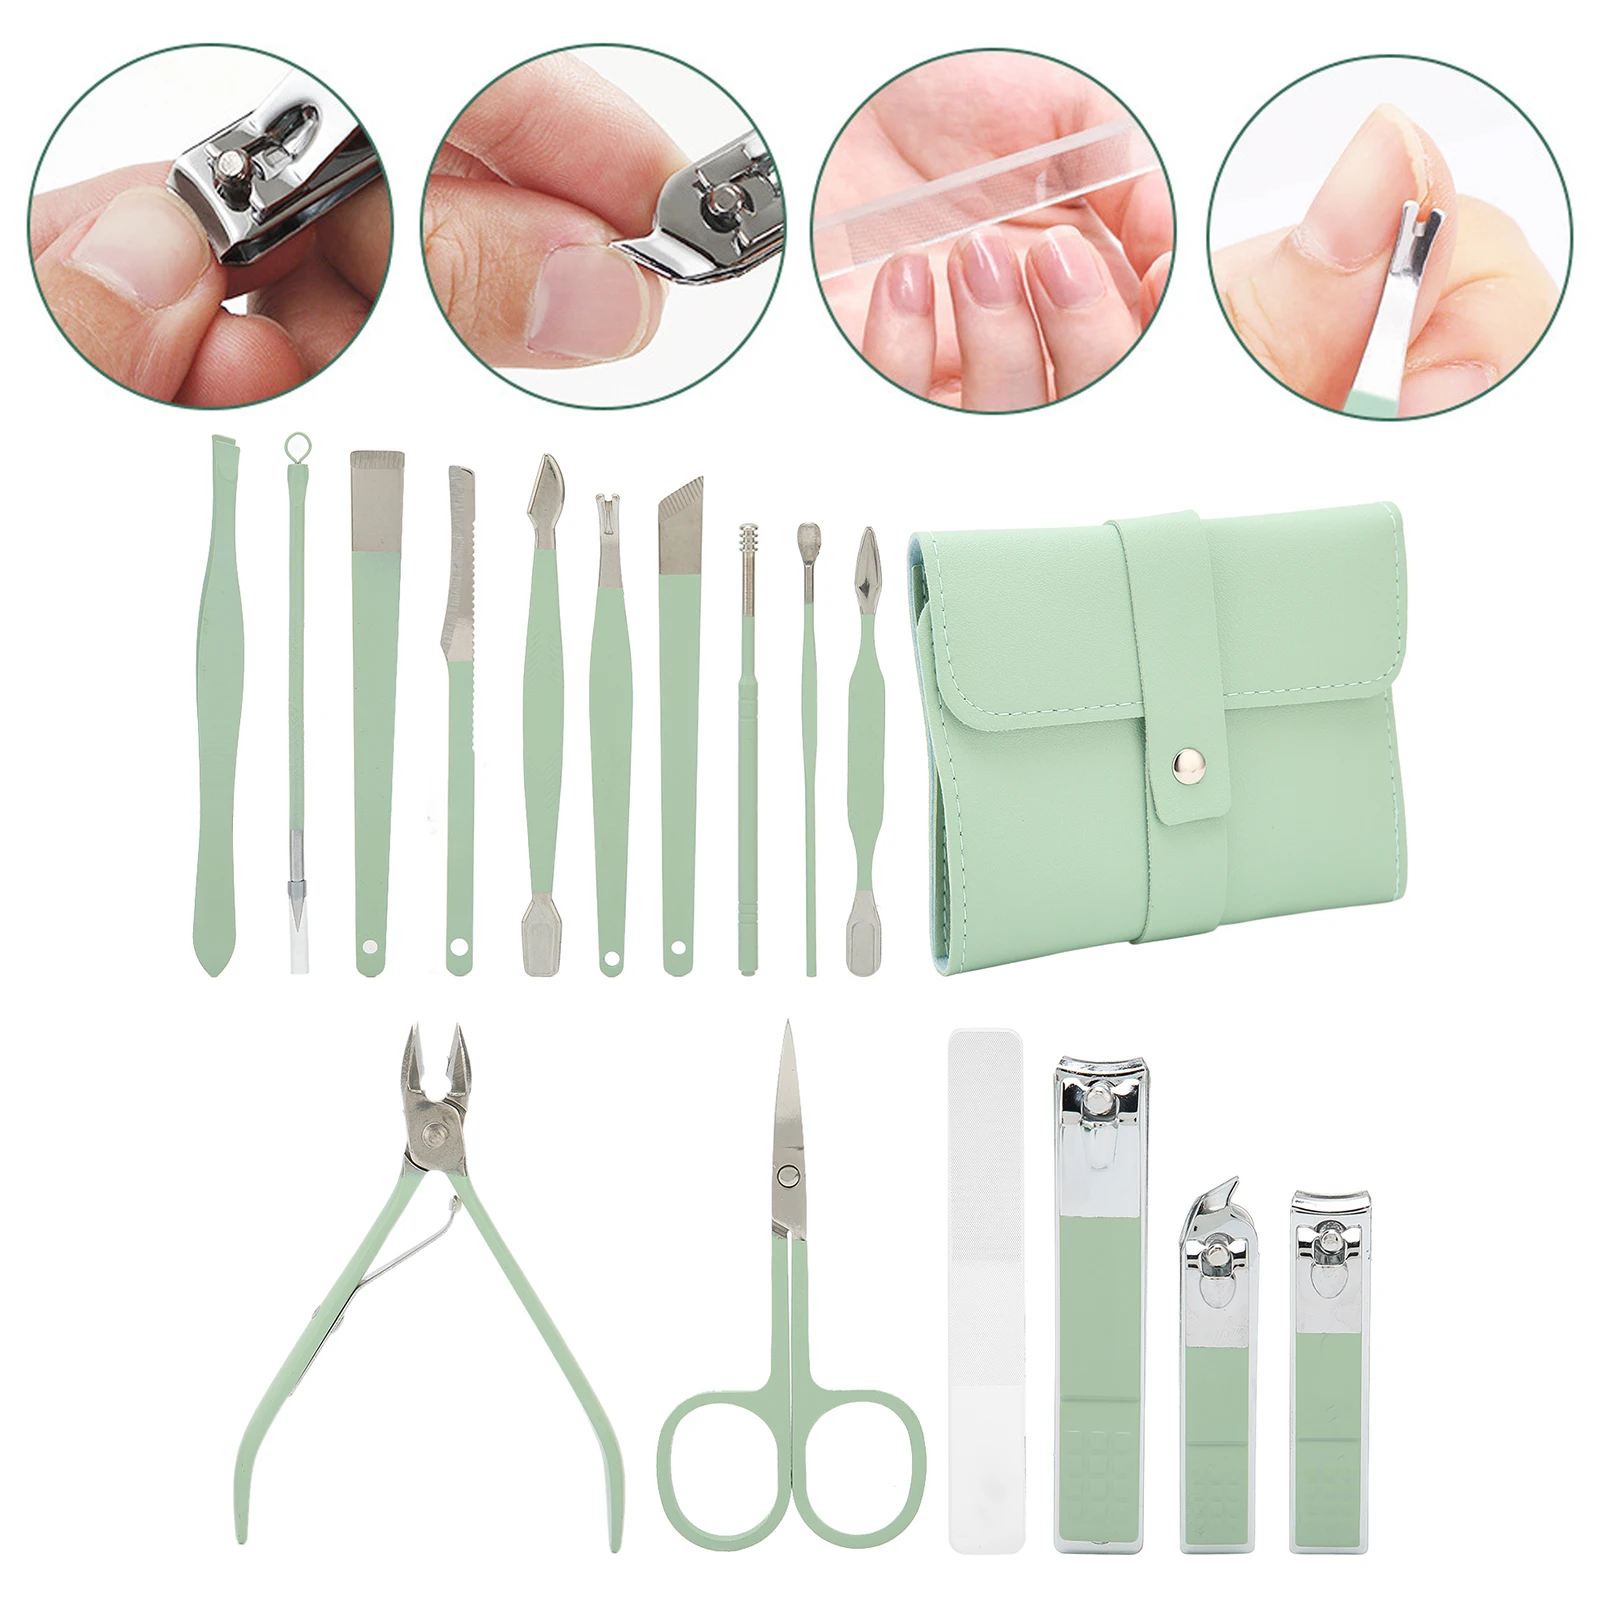 

16Pcs Nail Manicure Tool Set Stainless Steel Nail Clippers Scissors Kit Manicure Pedicure Grooming Kit with Storage Bag